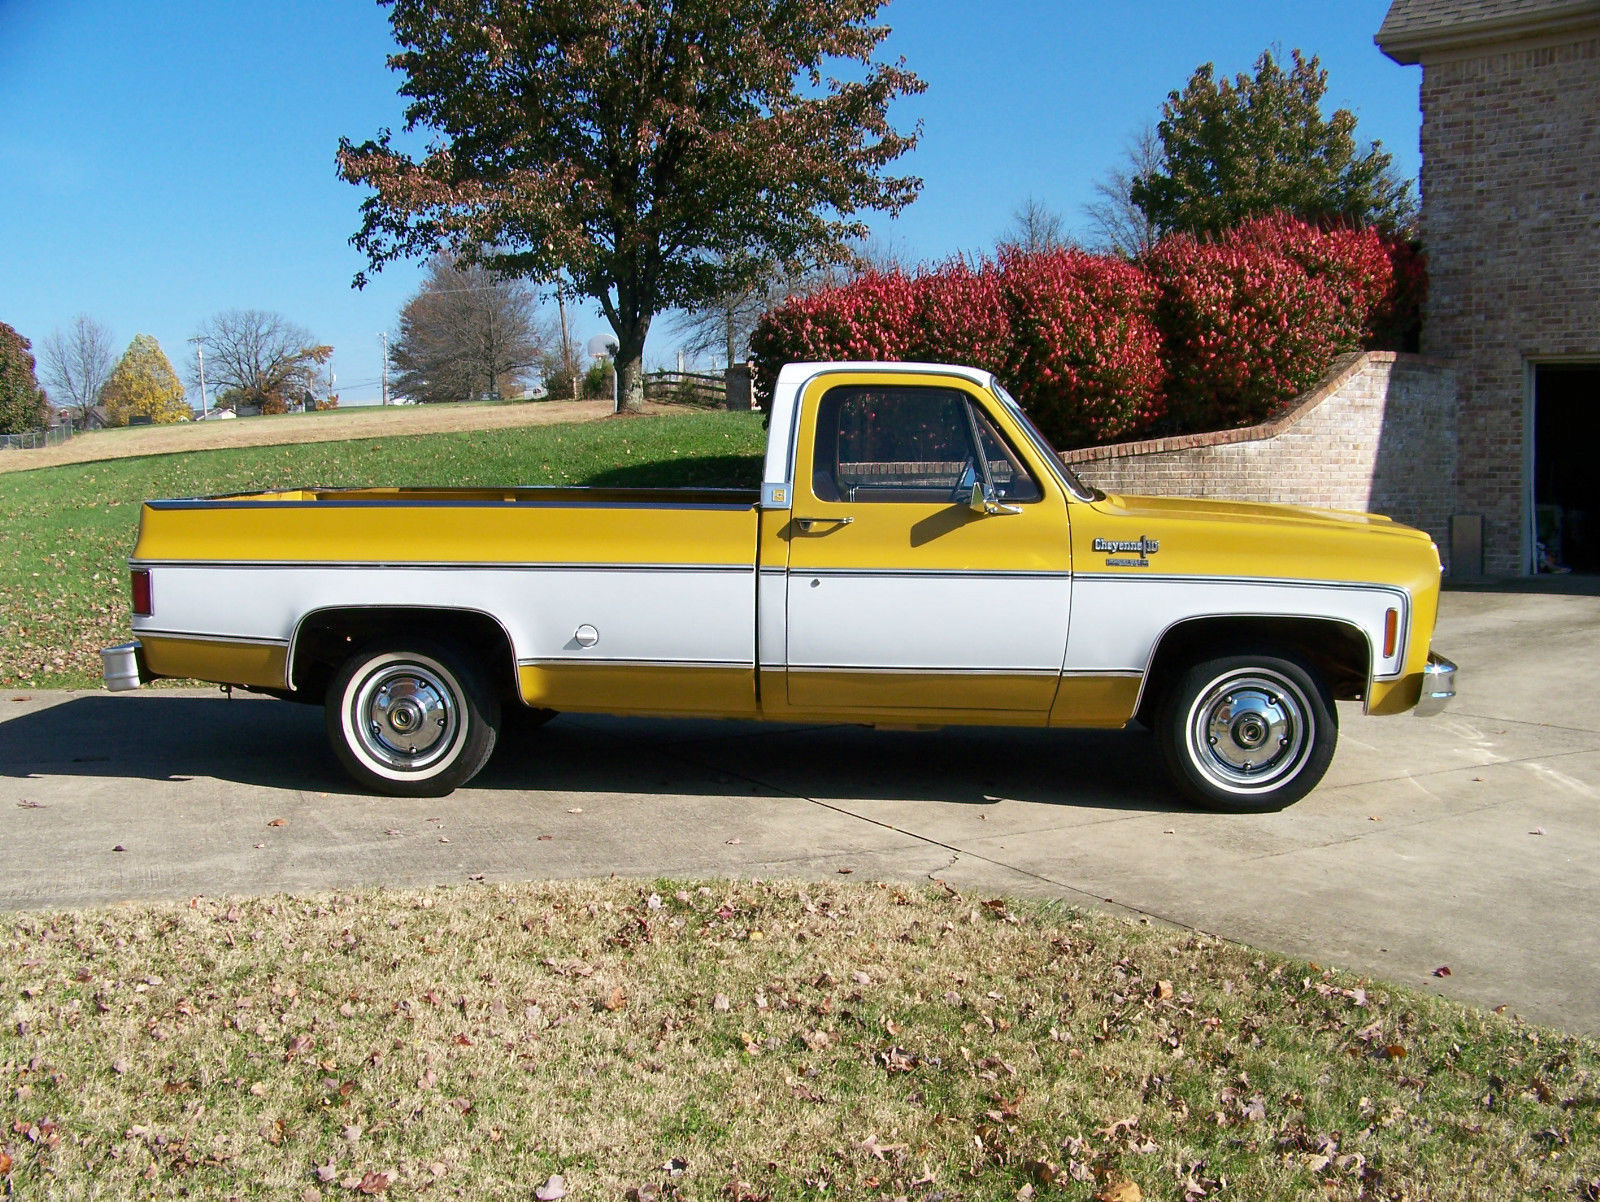 1974 Chevrolet C-10 for sale in Somerset, Kentucky, United States.